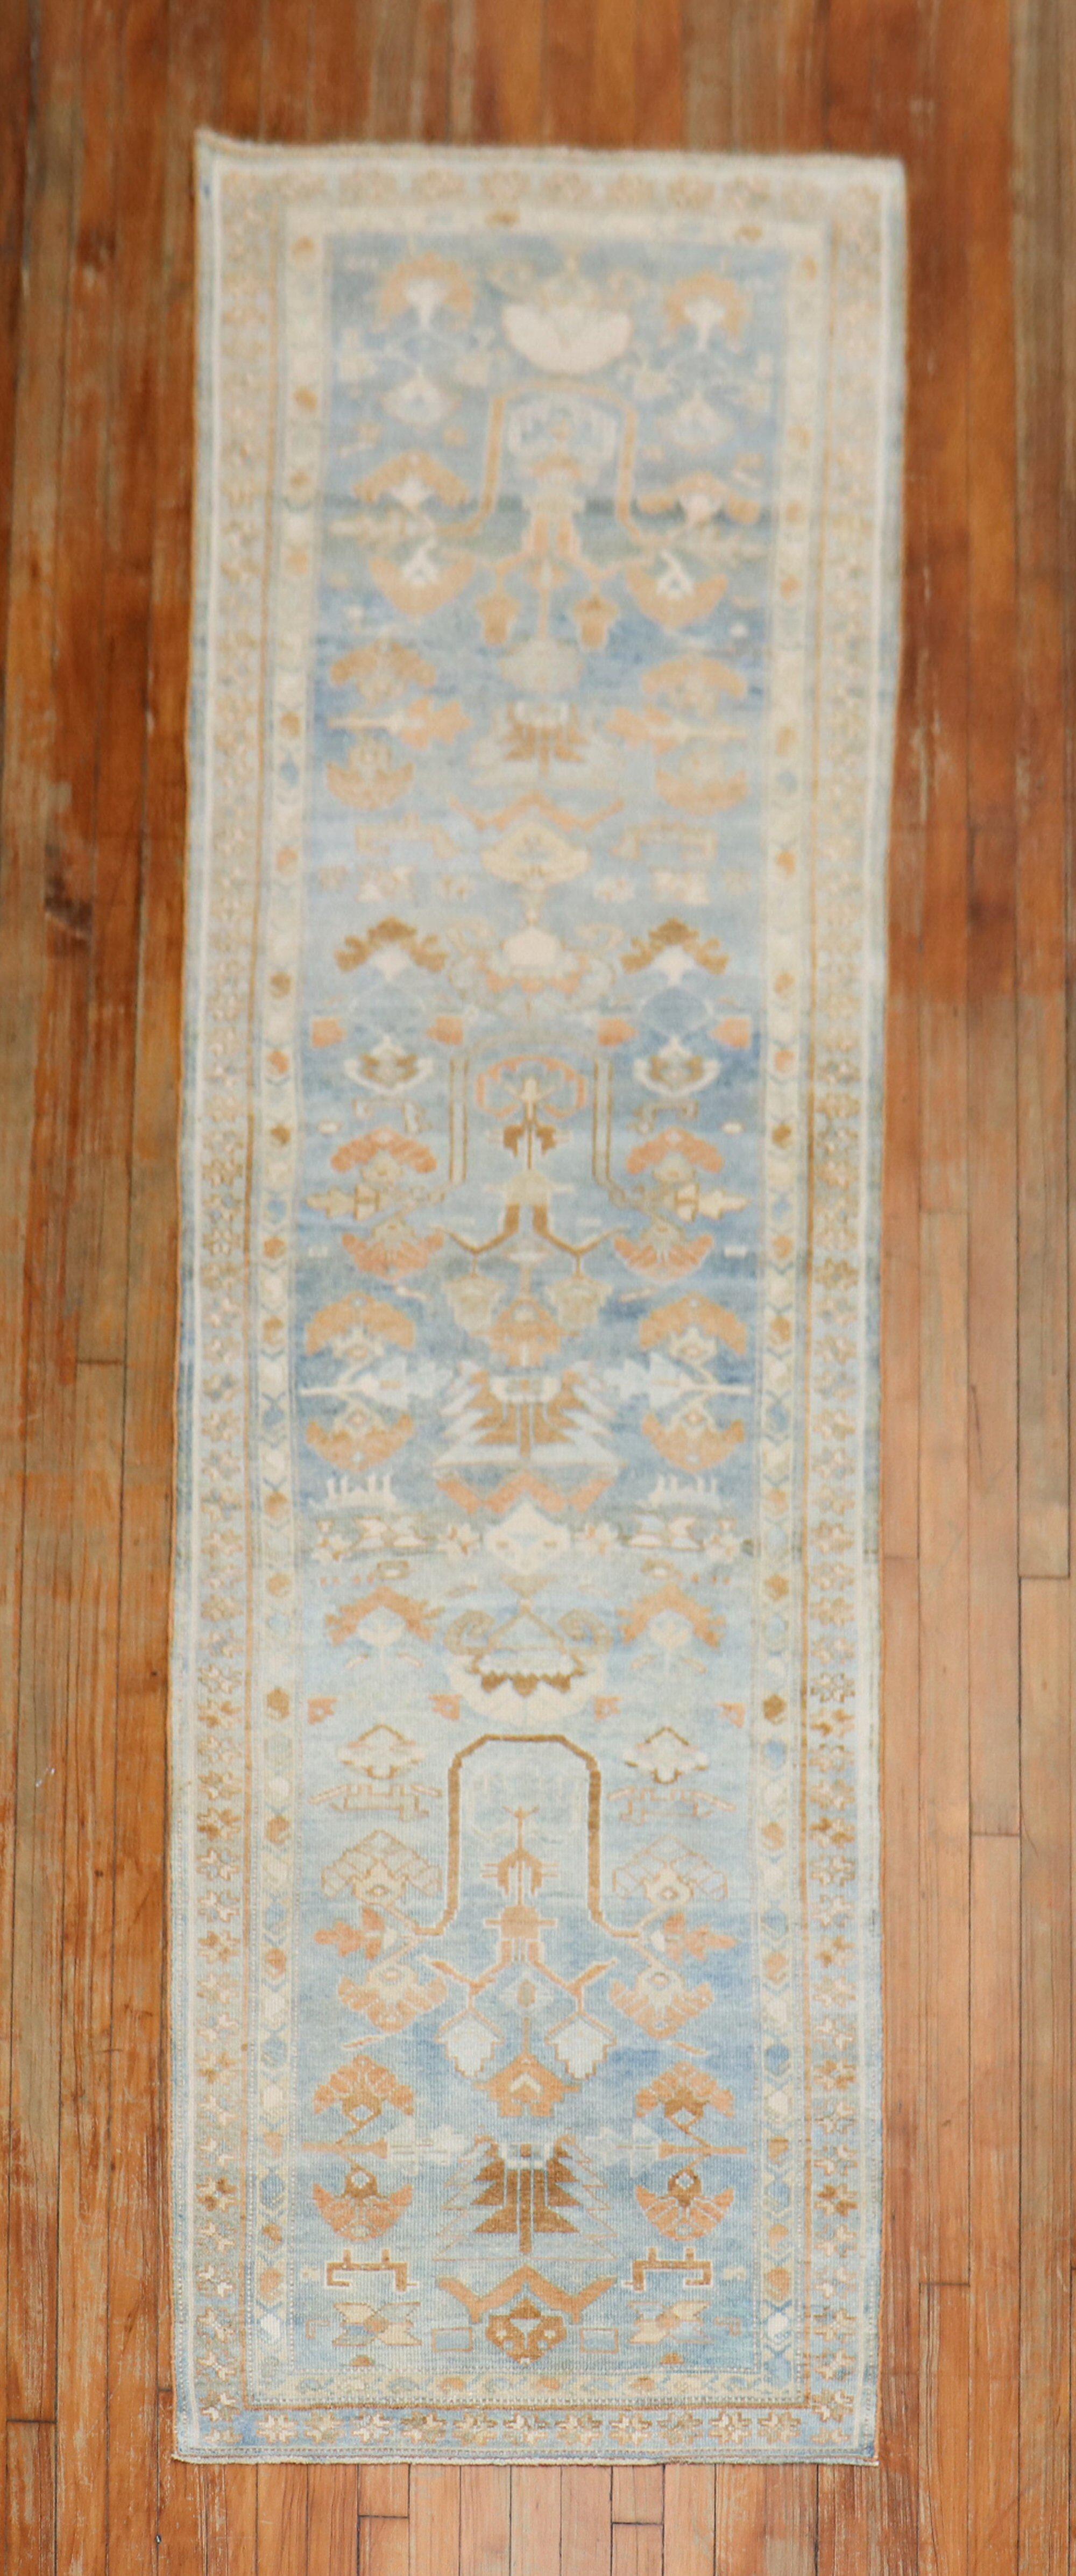 Early 20th century Persian Malayer rug in soft blue, brown, and apricot tones

Measures: 2'9'' x 9'7''.

